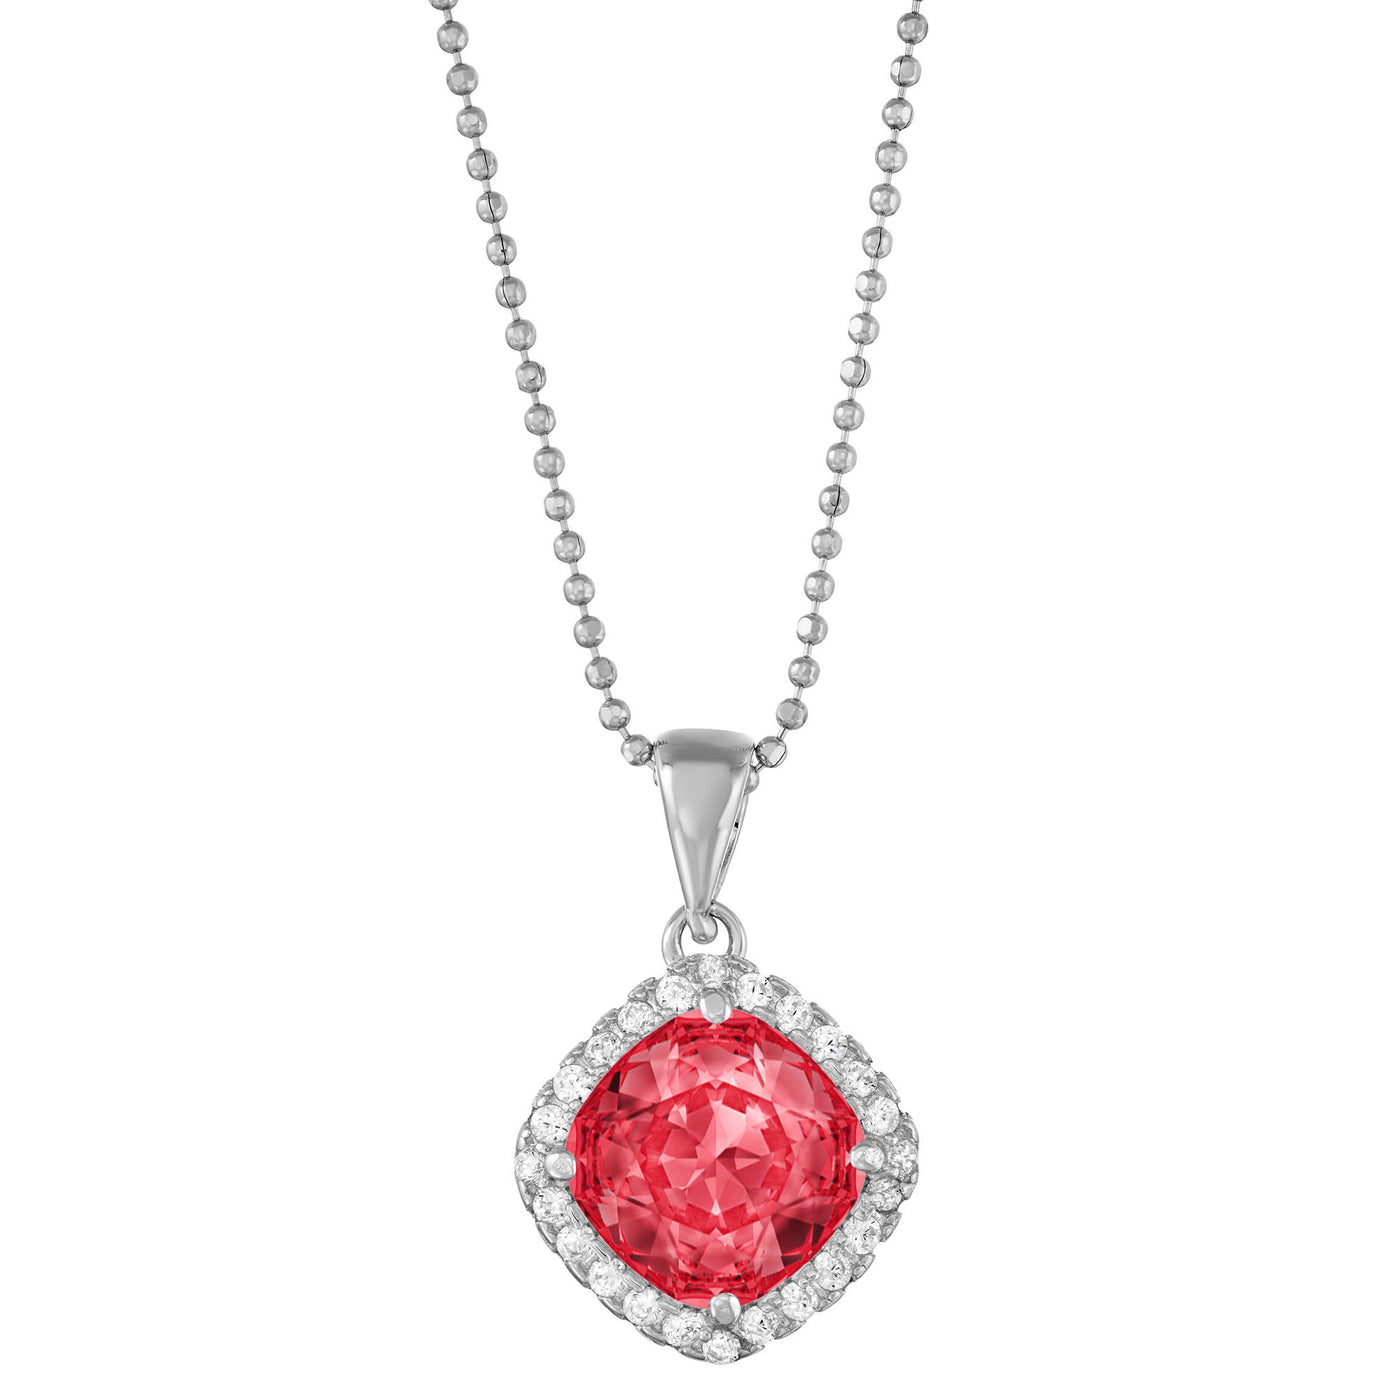 Rebecca Sloane Silver Cushion with Faceted Ruby CZ Pendant